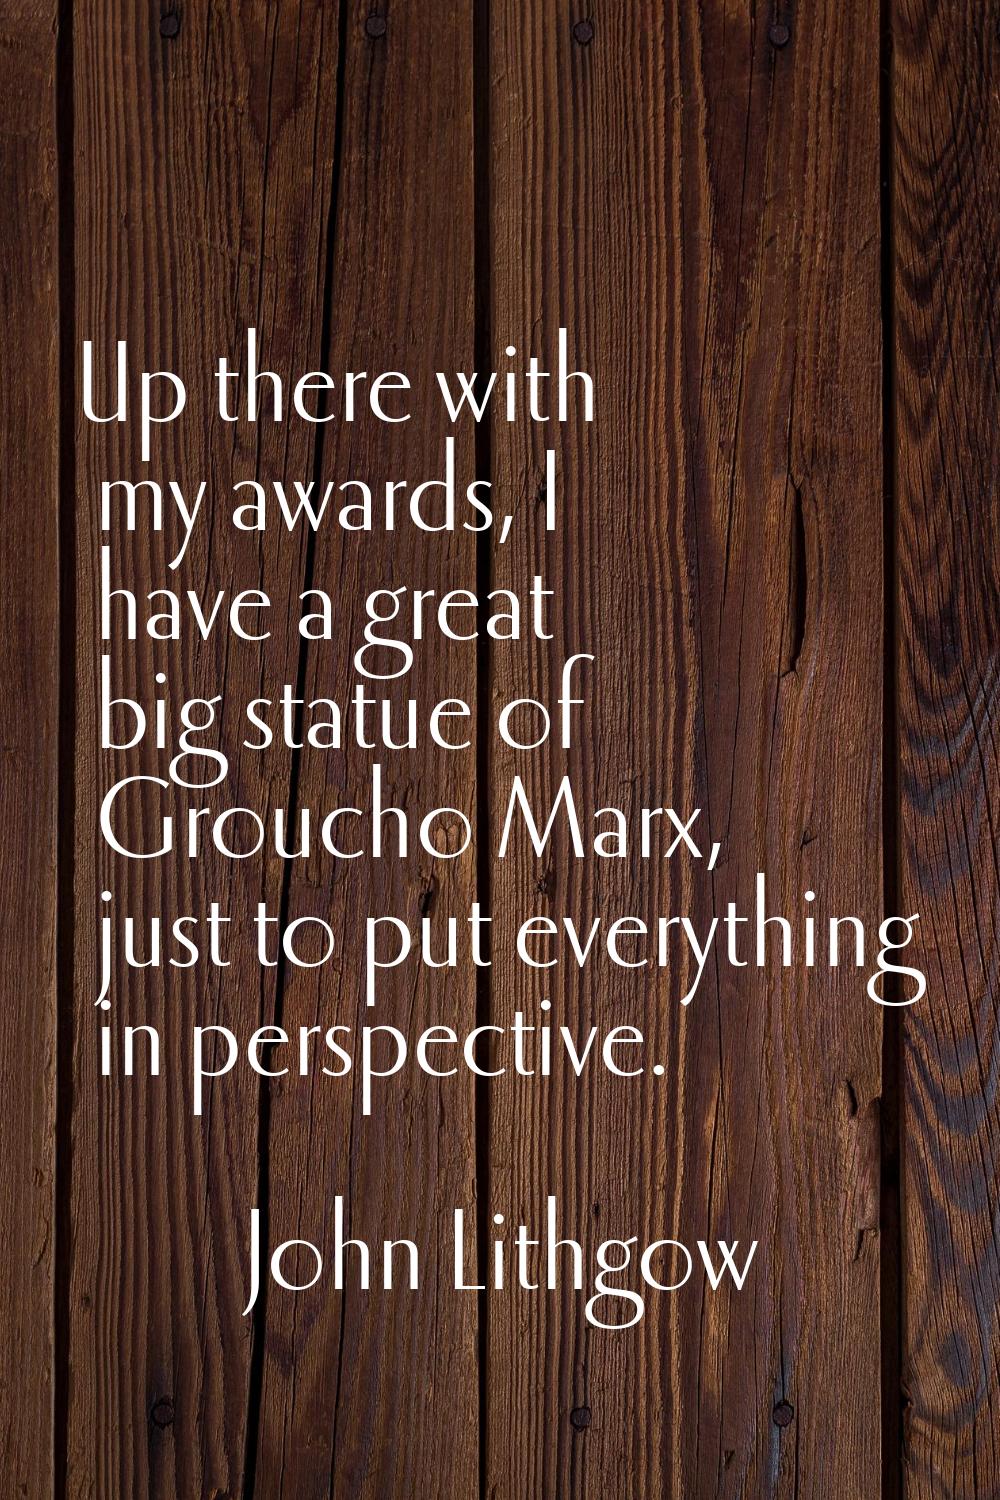 Up there with my awards, I have a great big statue of Groucho Marx, just to put everything in persp